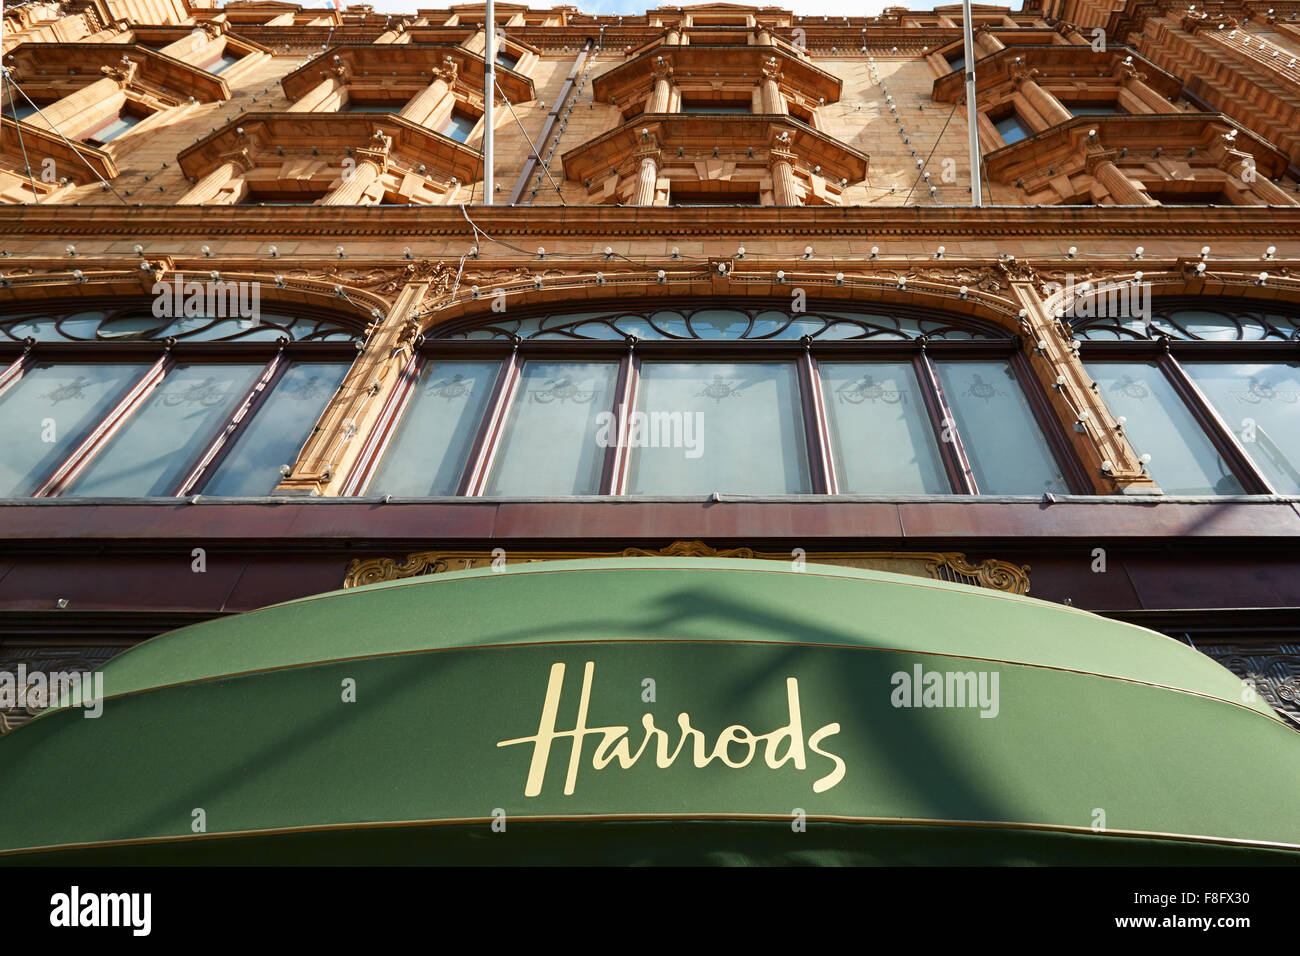 The famous Harrods department store building in a summer afternoon in London Stock Photo